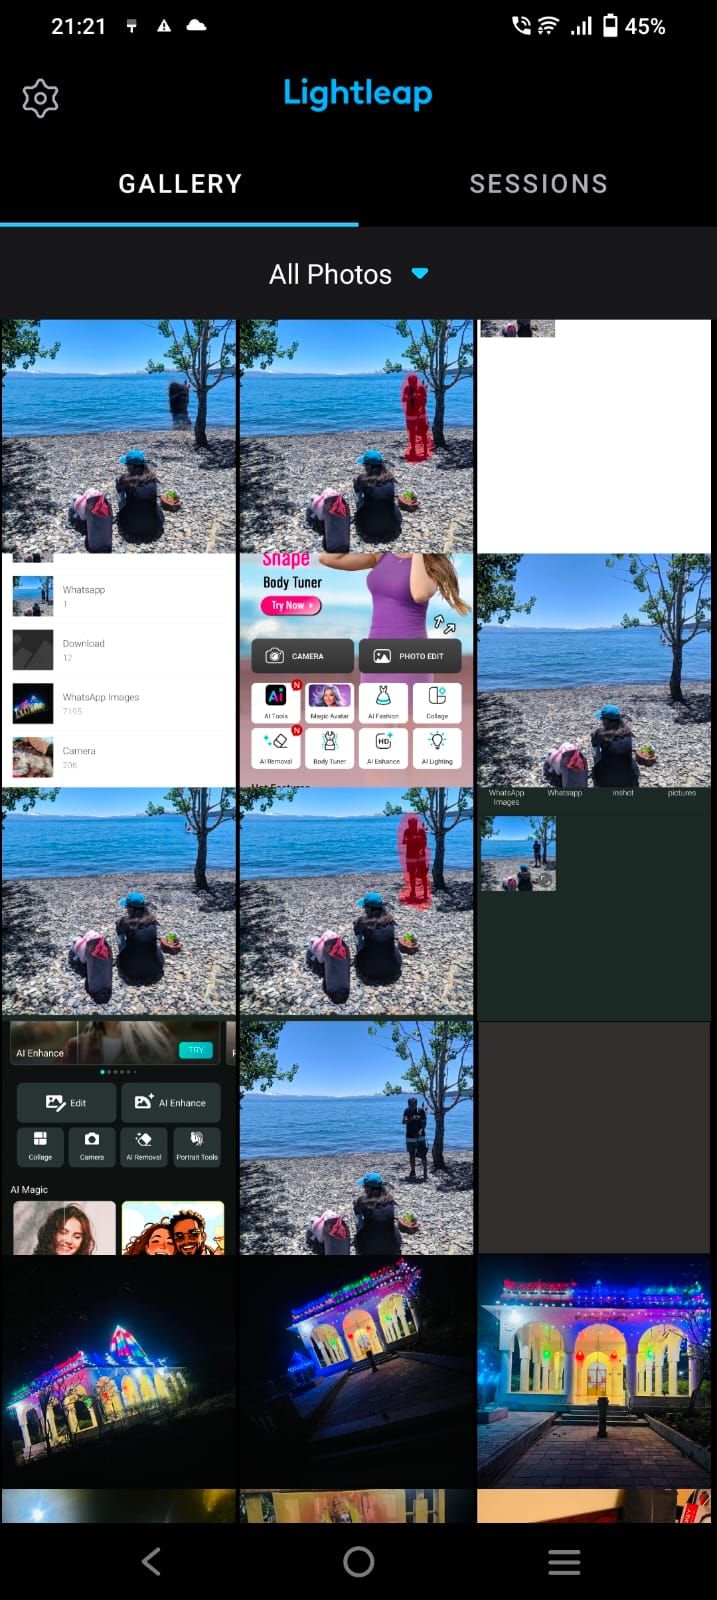 Screenshot of the image gallery in the Lightleap app